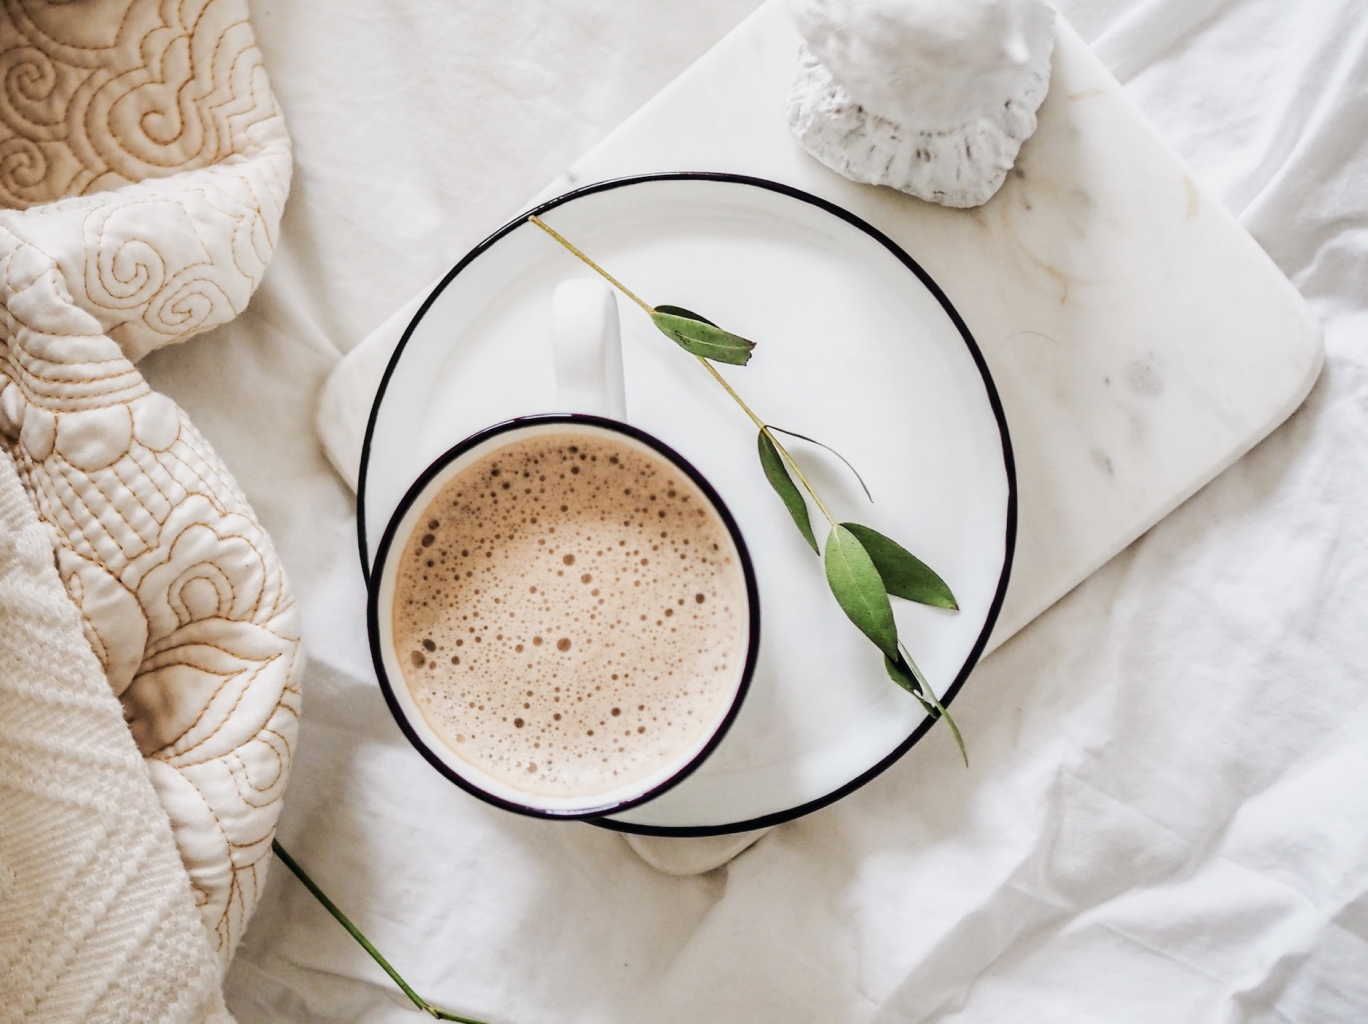 A cup of tea on a plate, minimalist wellness routine